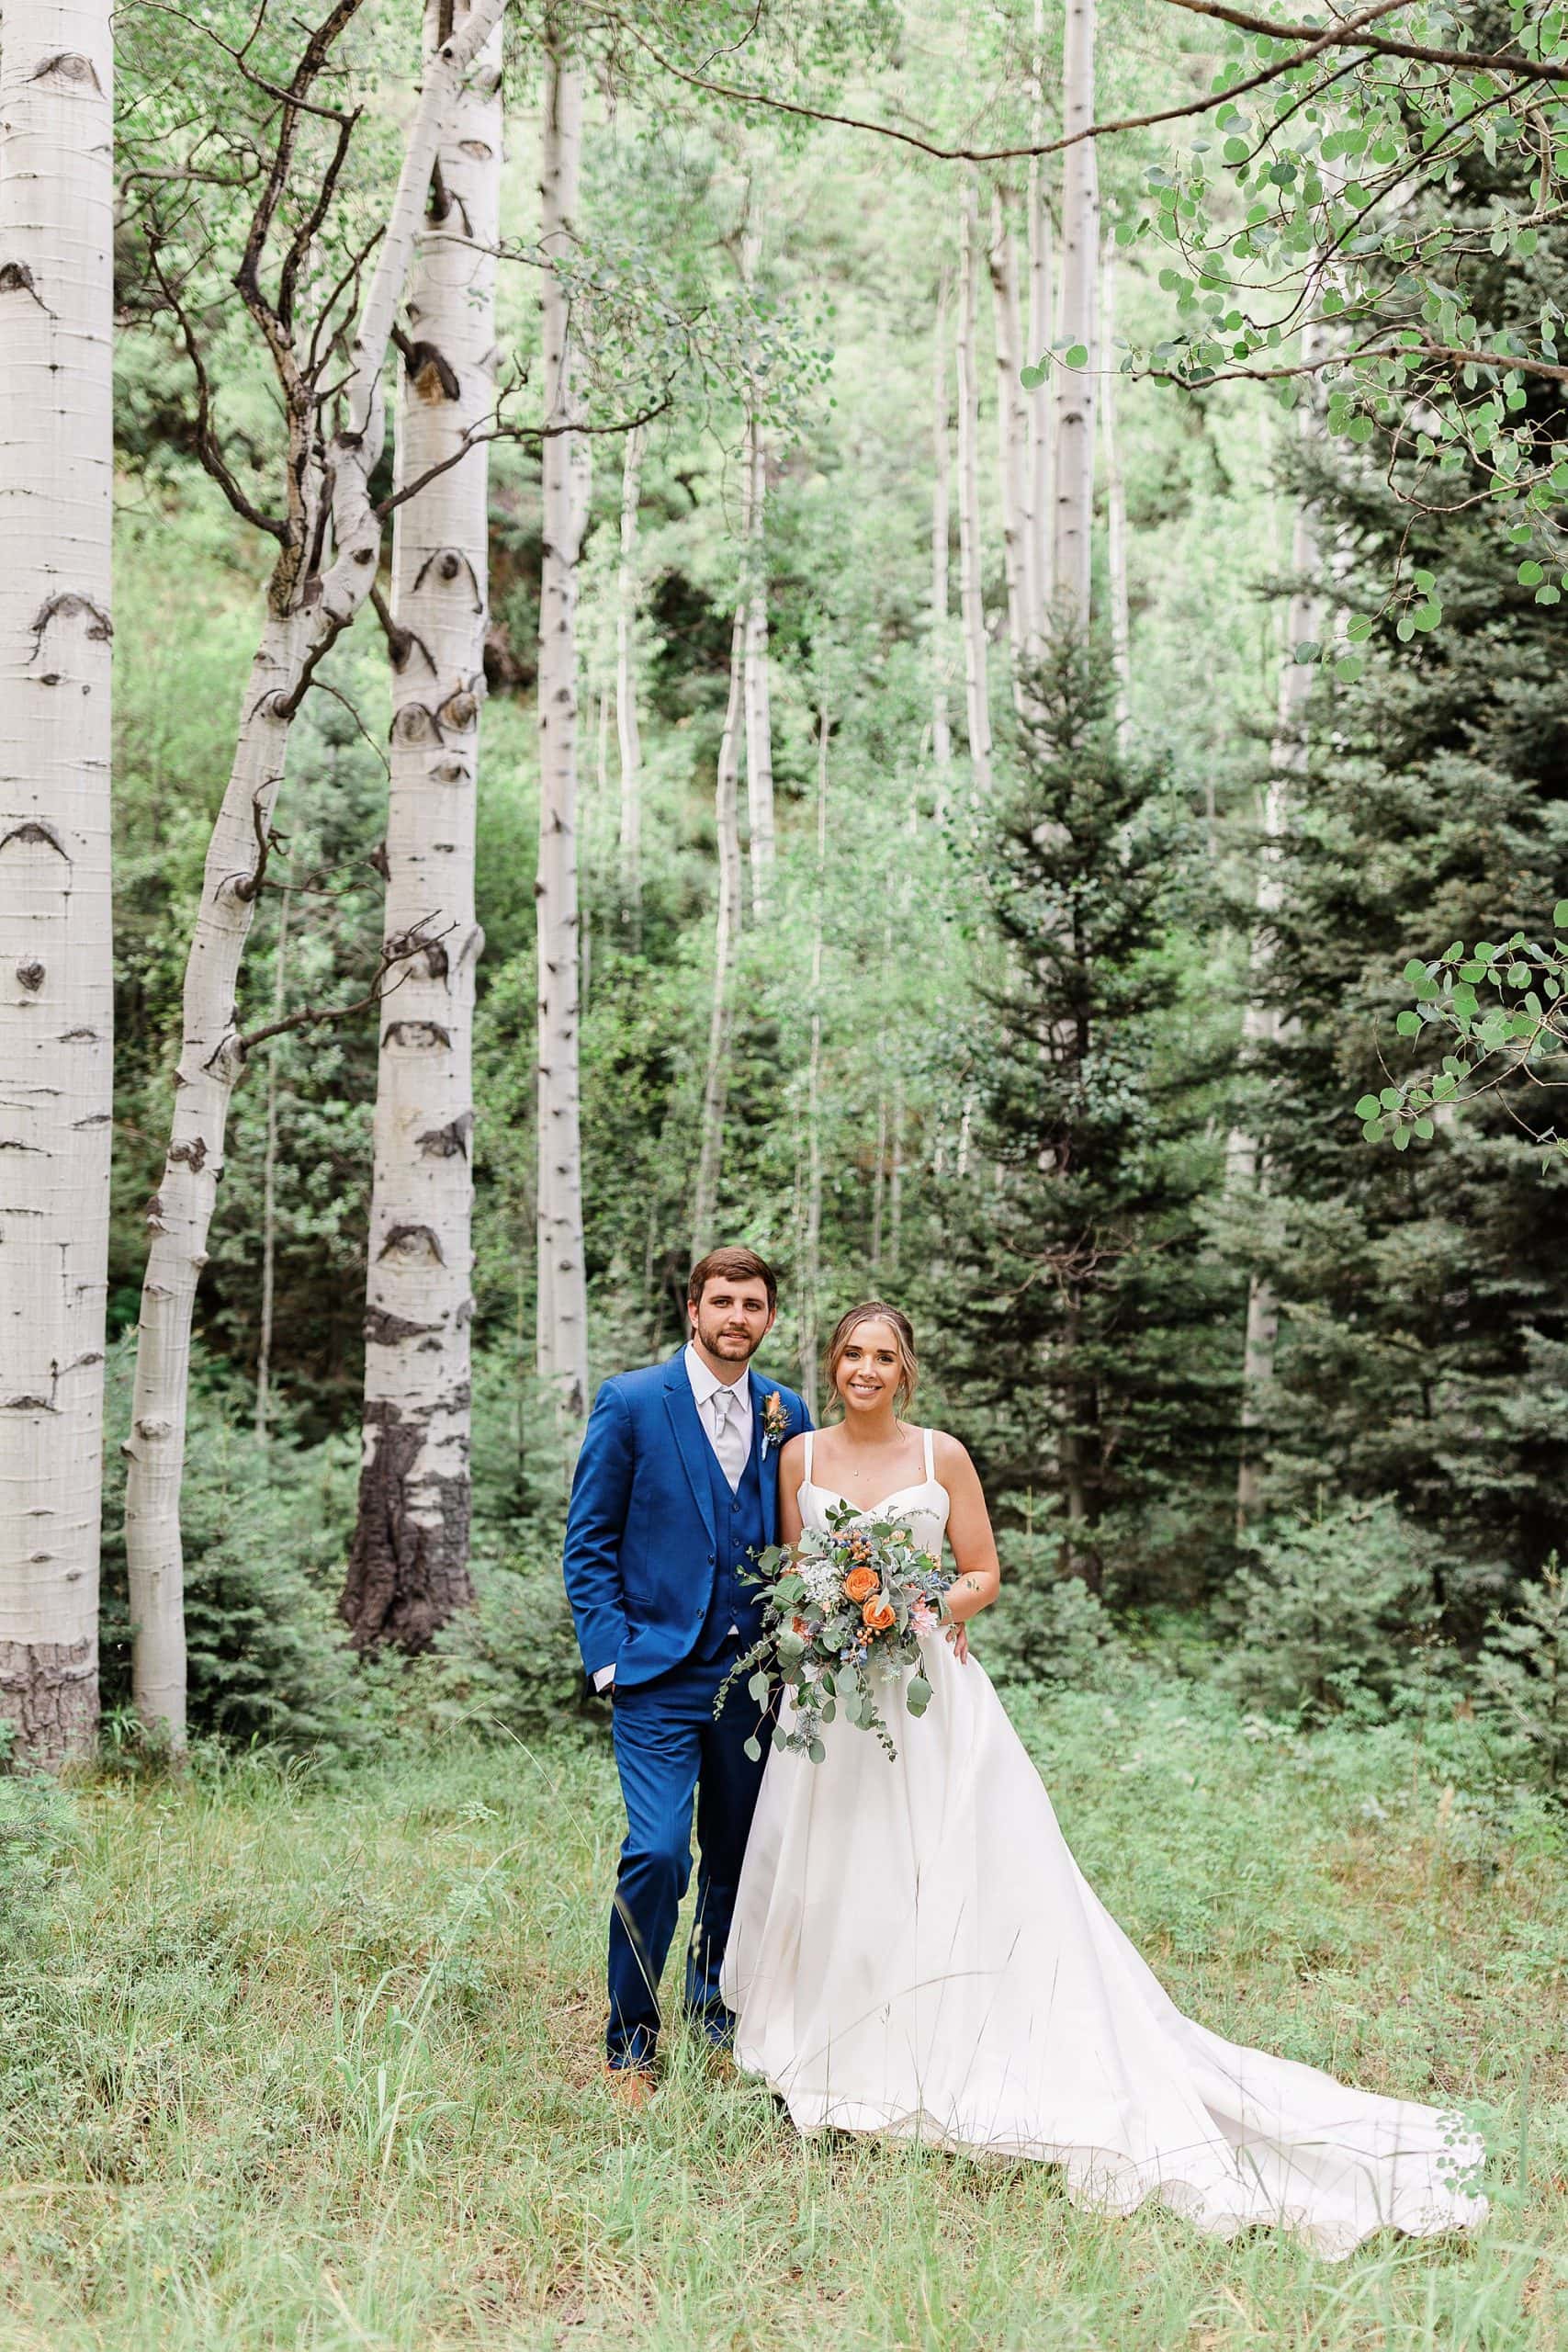 A couple poses in an evergreen forest among Aspens in Colorado